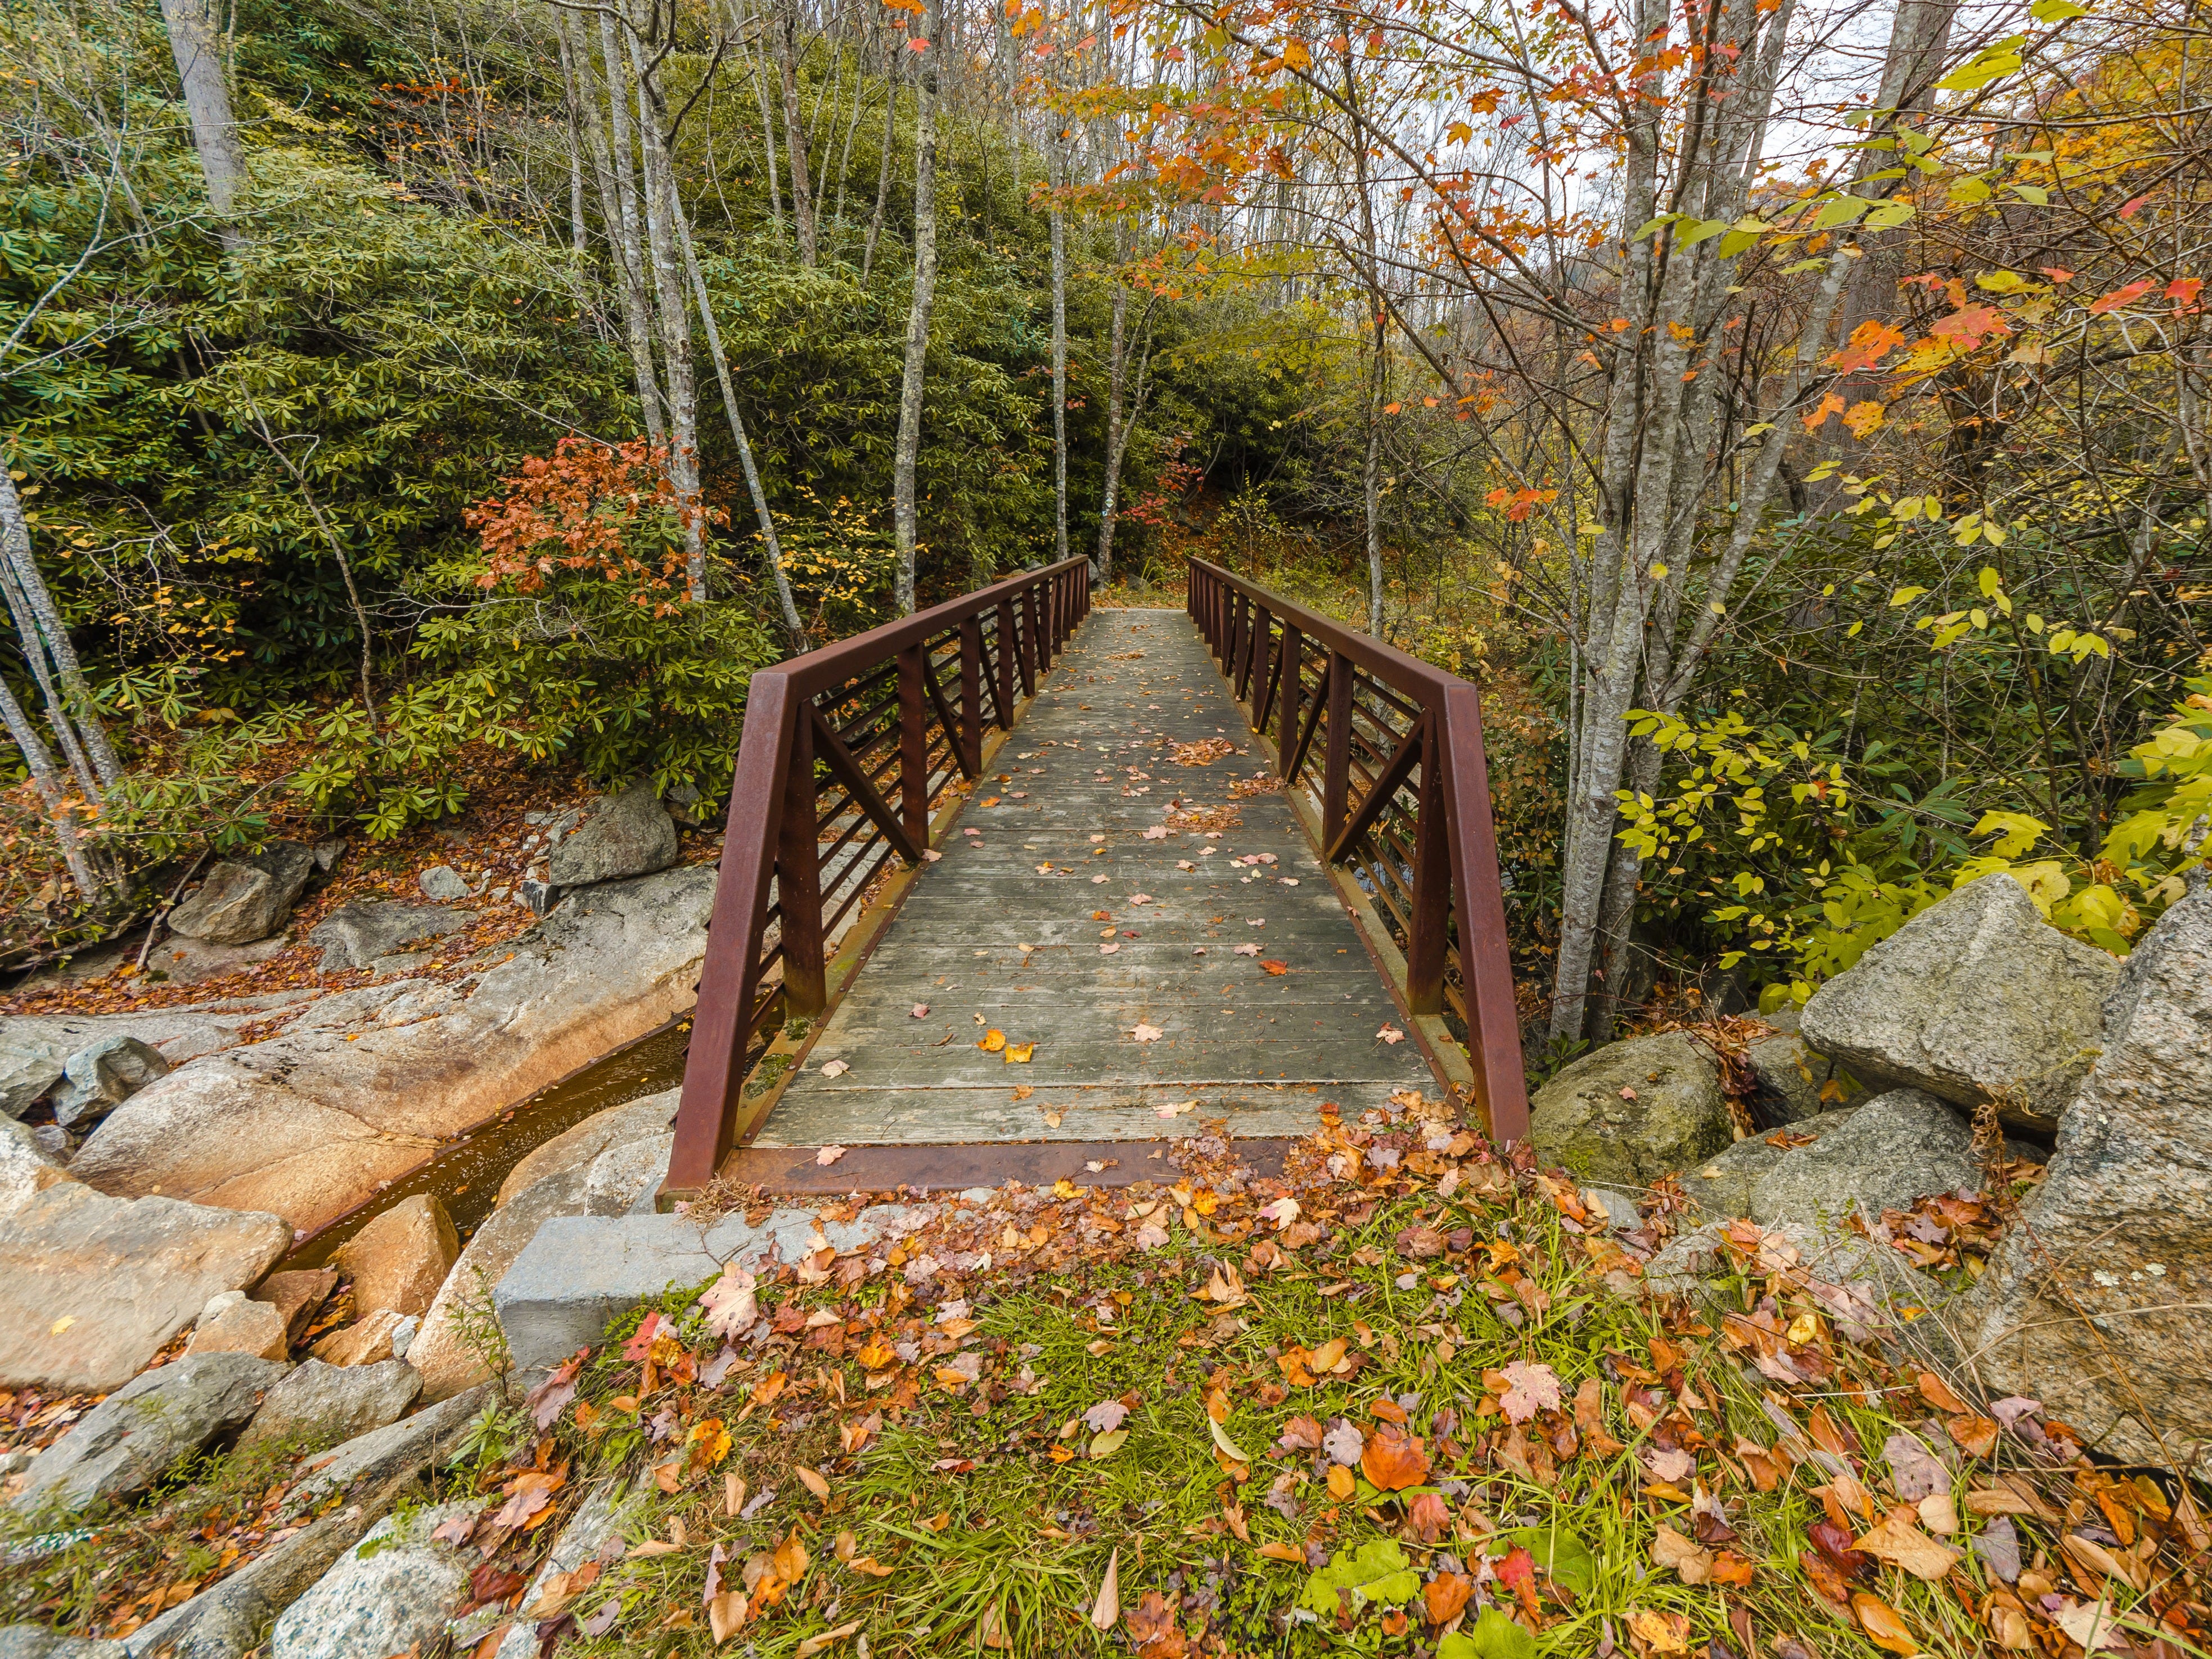 <p>Here, you'll encounter <a href="https://beechmtn.com/emerald-outback/">7 miles of treks</a> that are designed to accommodate all experience levels. Whether you're wanting a leisurely afternoon stroll or something more intense, you'll find it there.</p><p>Trails are marked with green for beginner routes, blue for intermediate routes, and black for advanced trails. All the hikes offer the chance to trek through lush forests and take in some gorgeous views at the lookout points.</p>